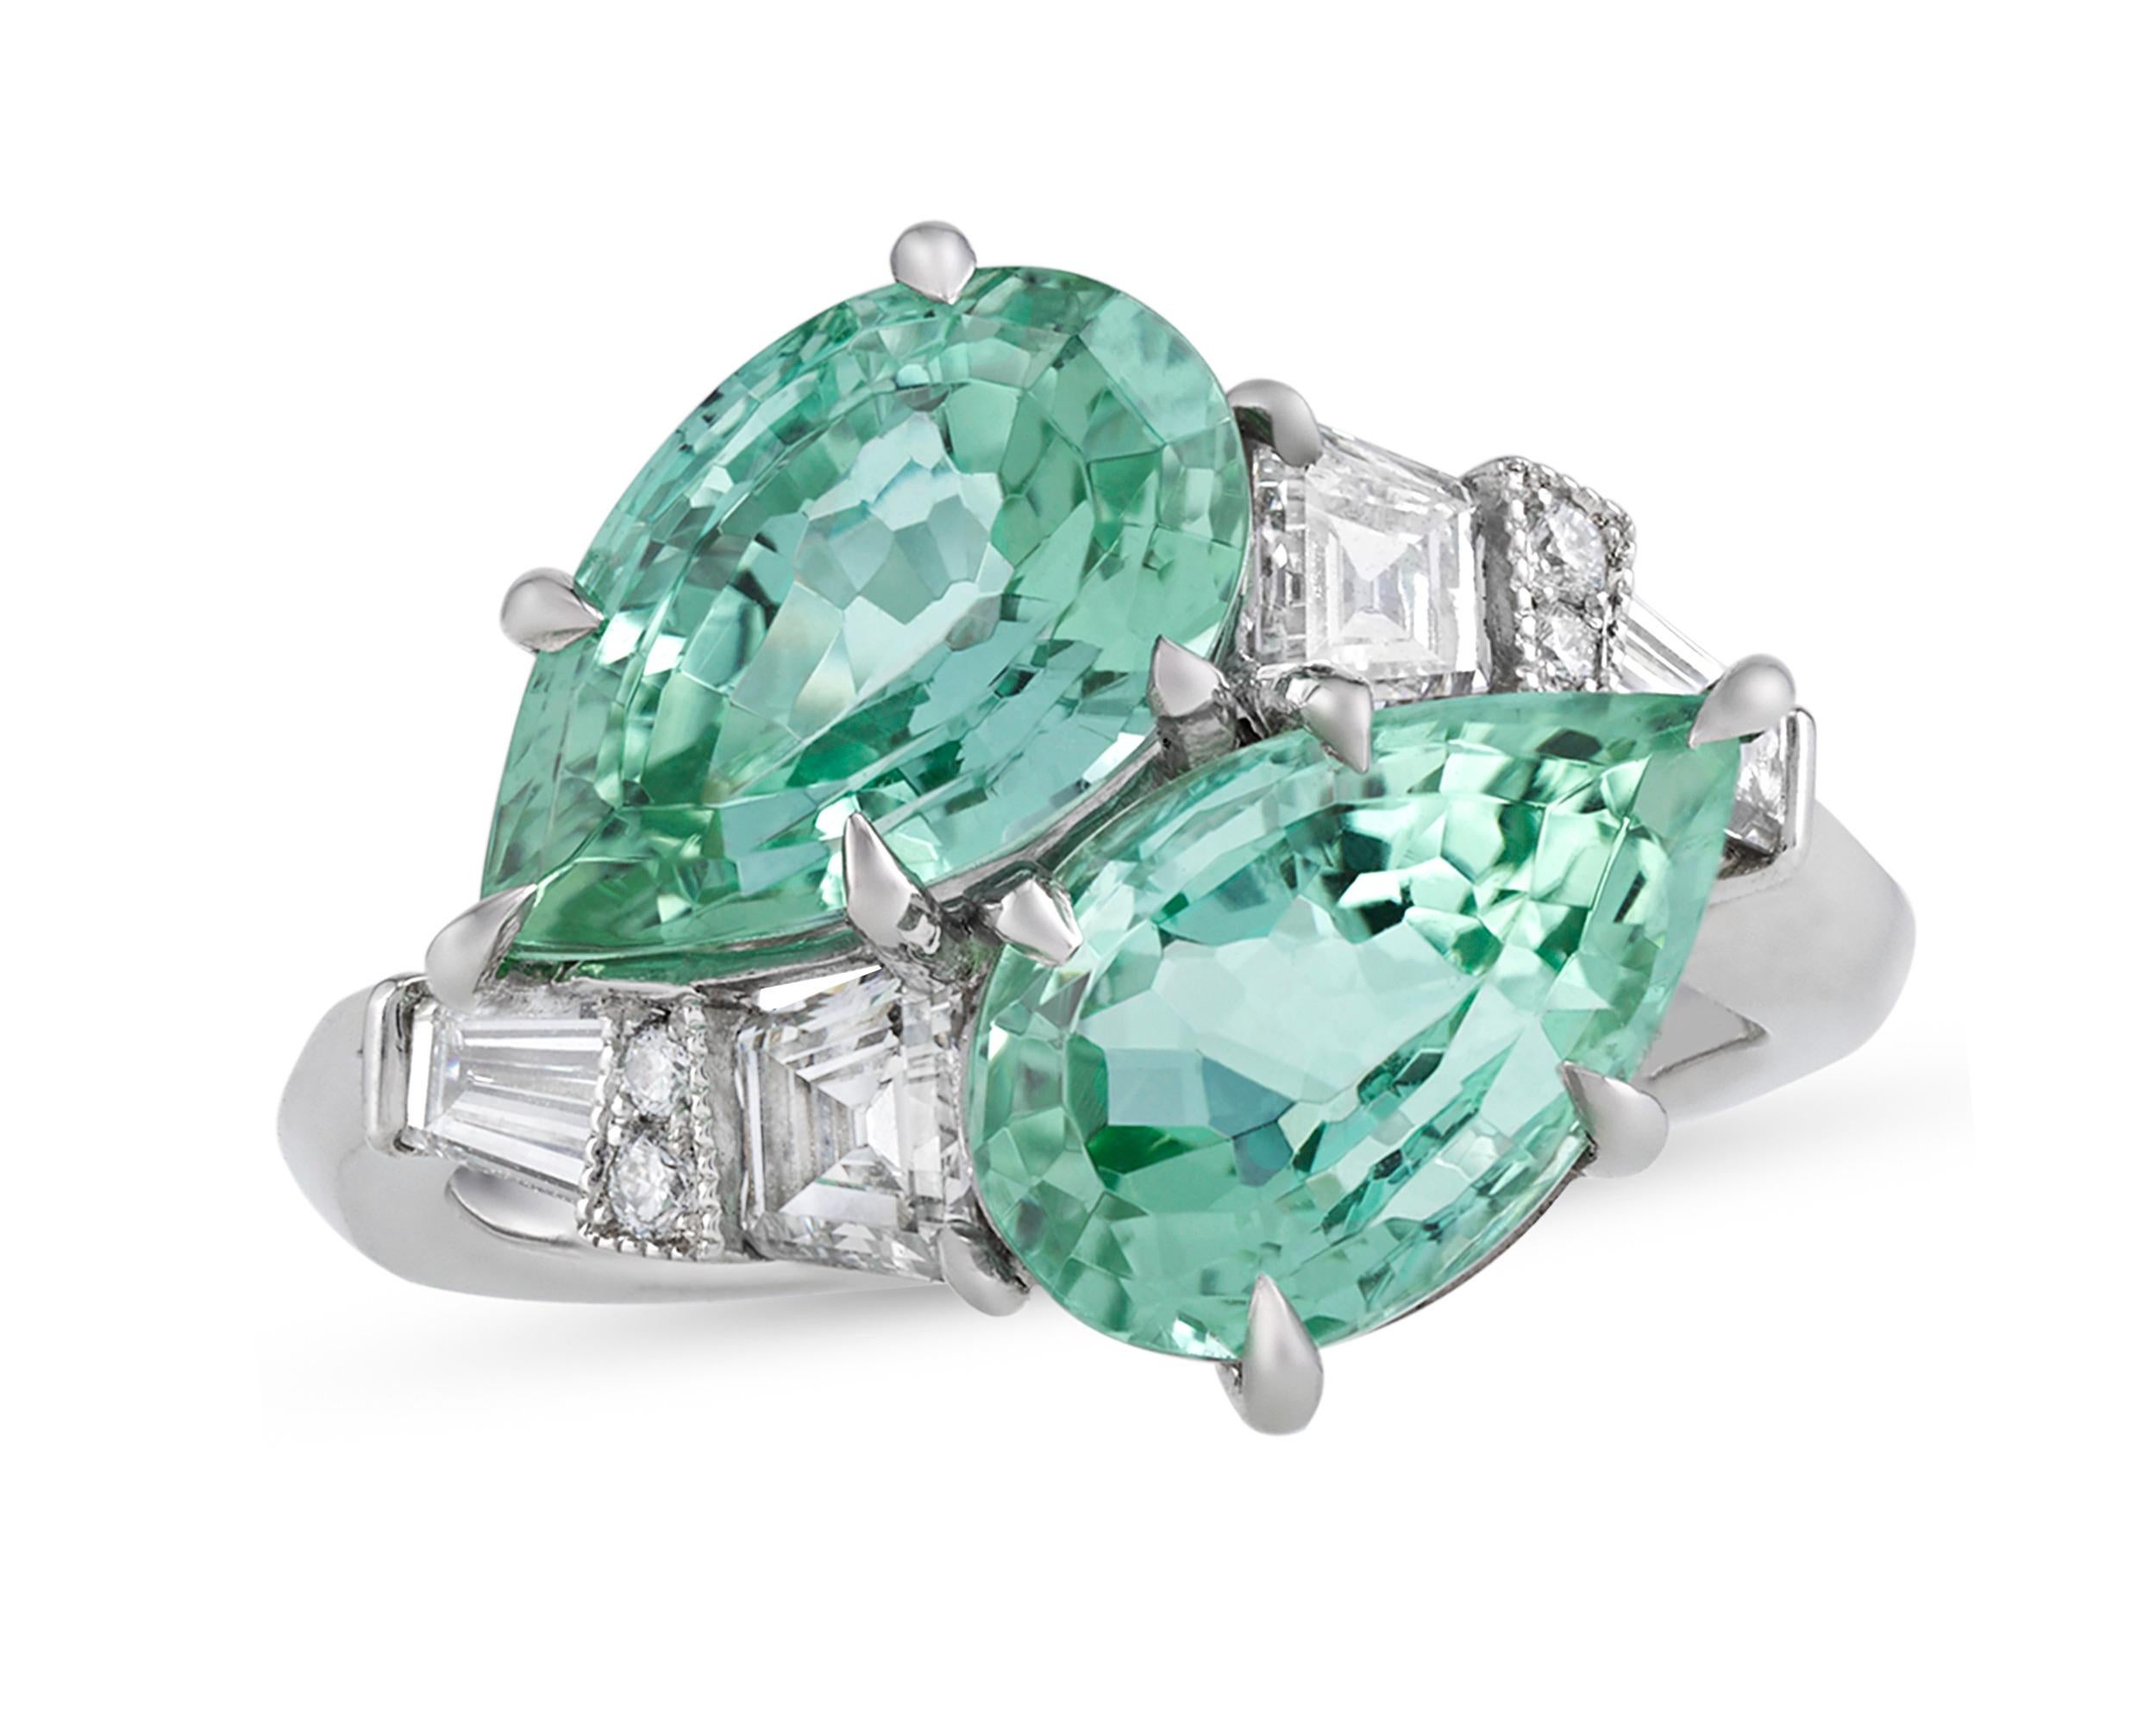 The refreshing and crisp green hue of the delectable mint tourmalines in this Raymond Yard bypass ring brings to mind the coming of spring. Weighing 5.96 combined carats, these pear-shaped gemstones reside in their platinum setting amongst baguette,